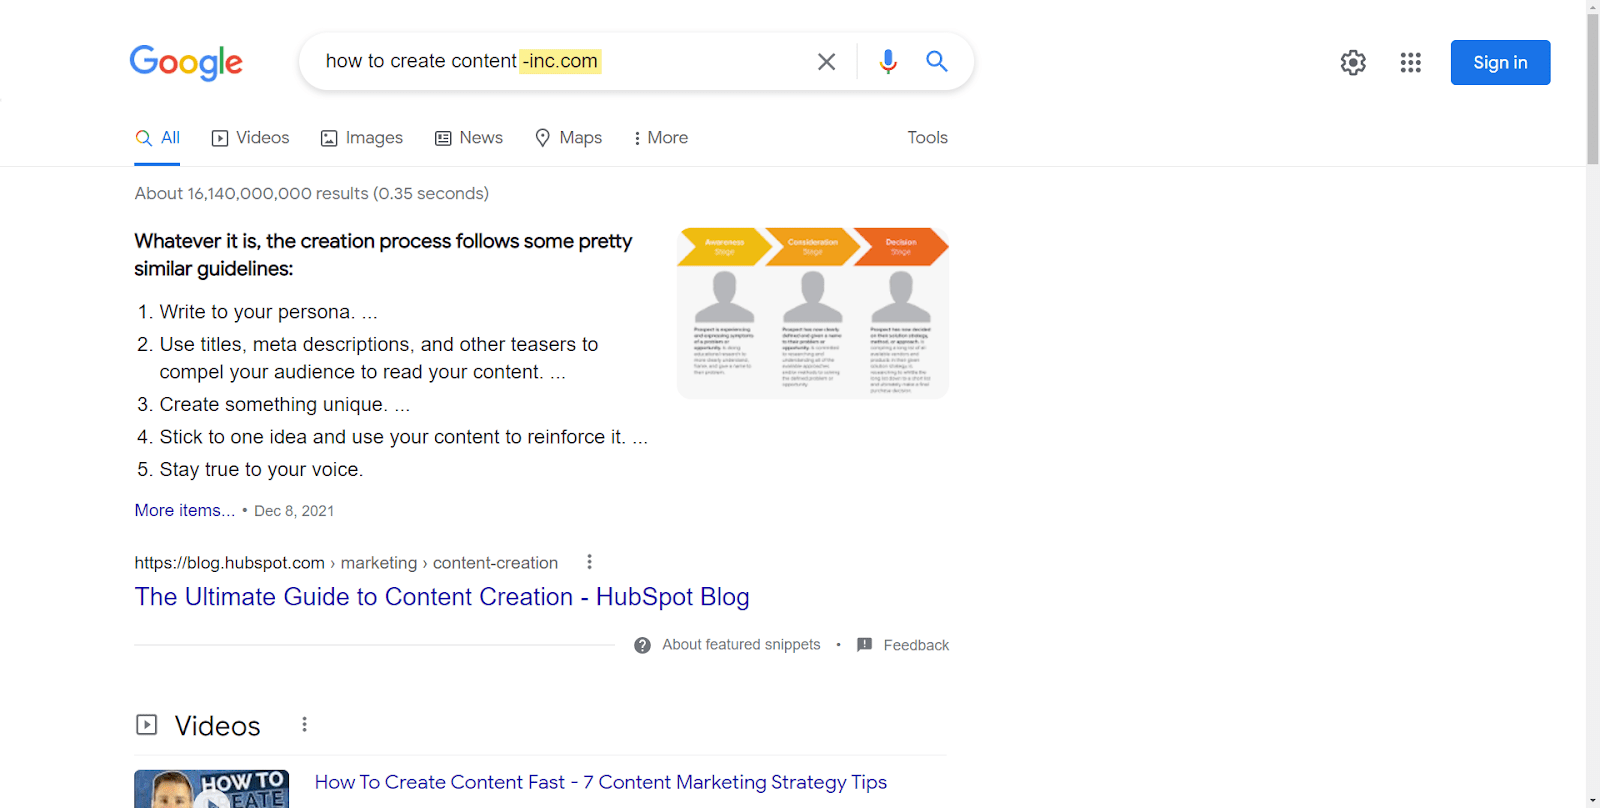 Google search result for "how to create content" showing the second featured snippet